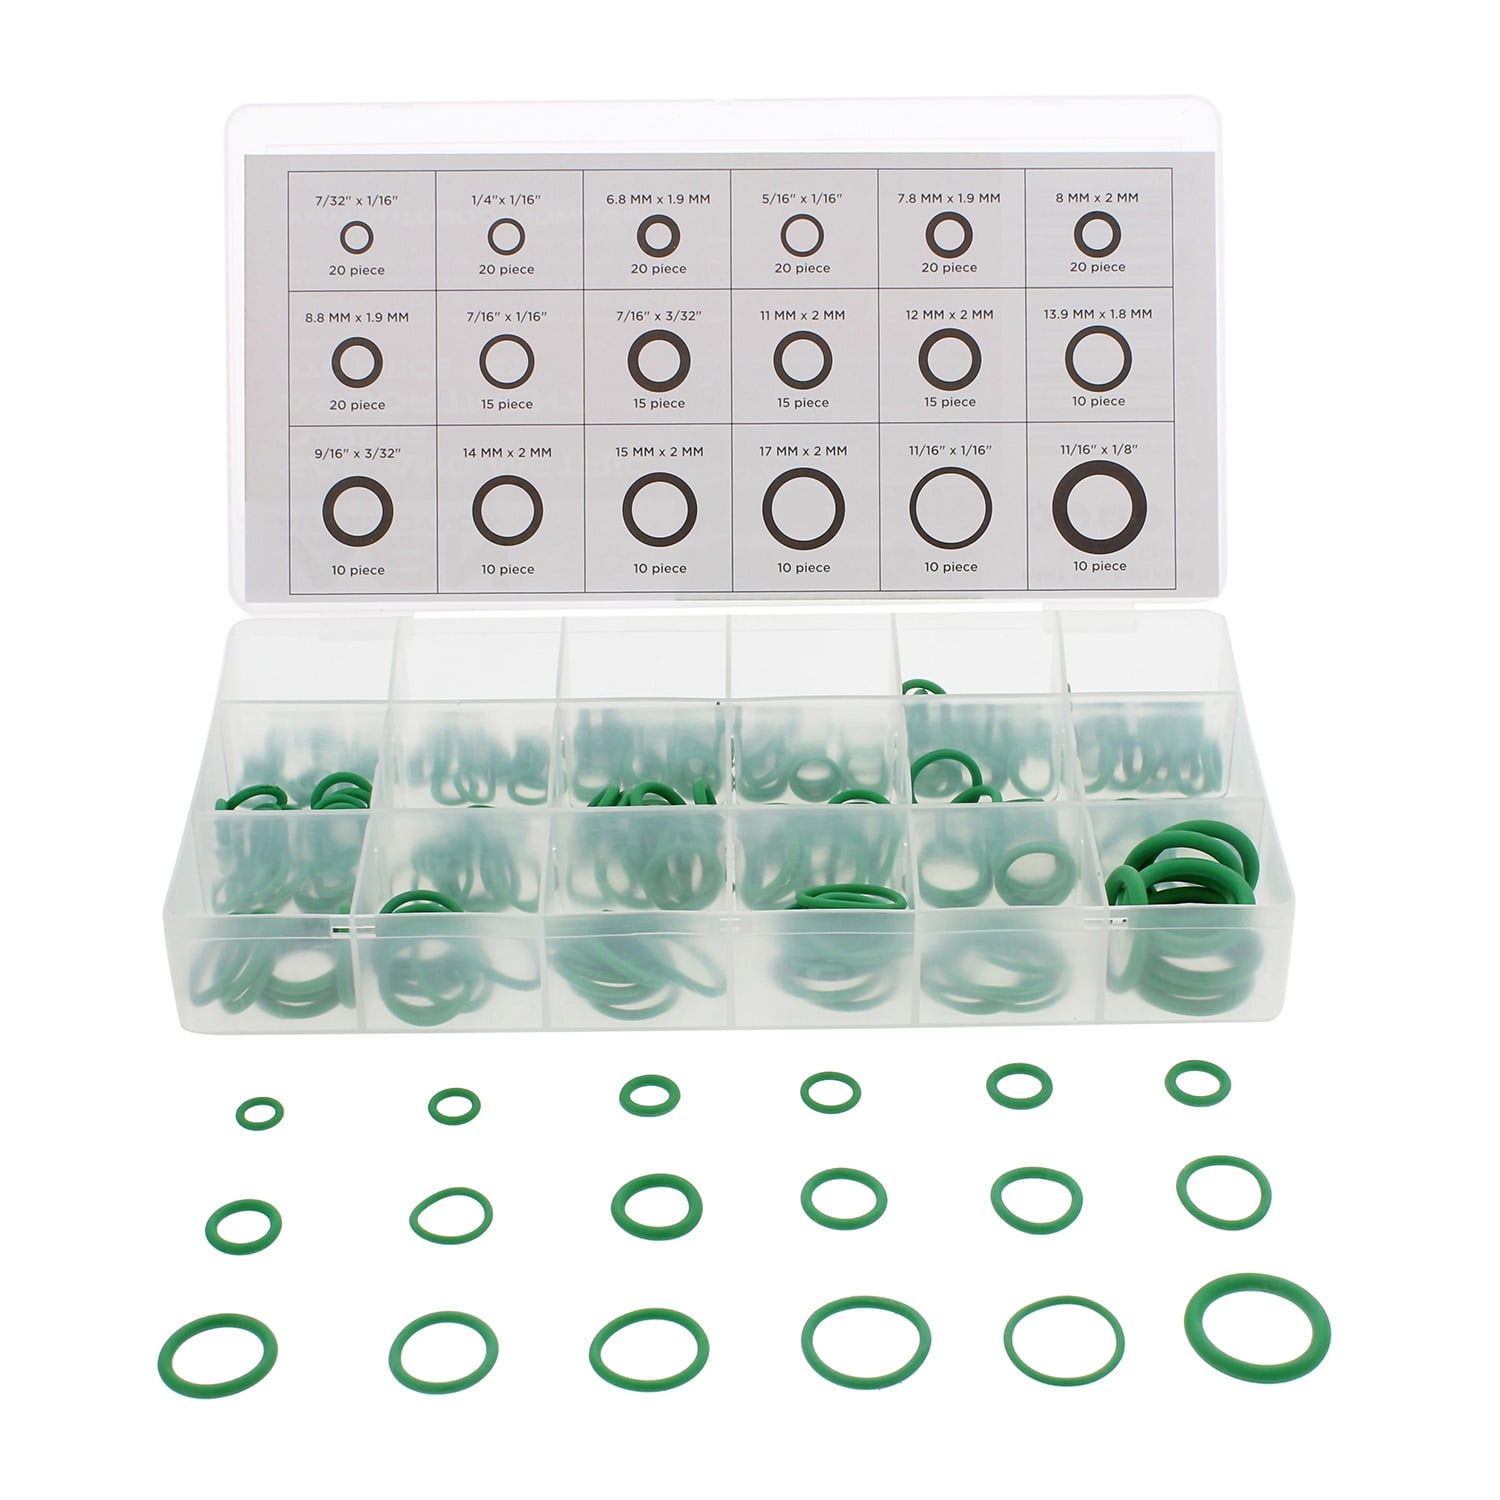 NEF O Ring Kit, Rubber Metric O-Ring Assortment, 32 Sizes, 419 Pieces